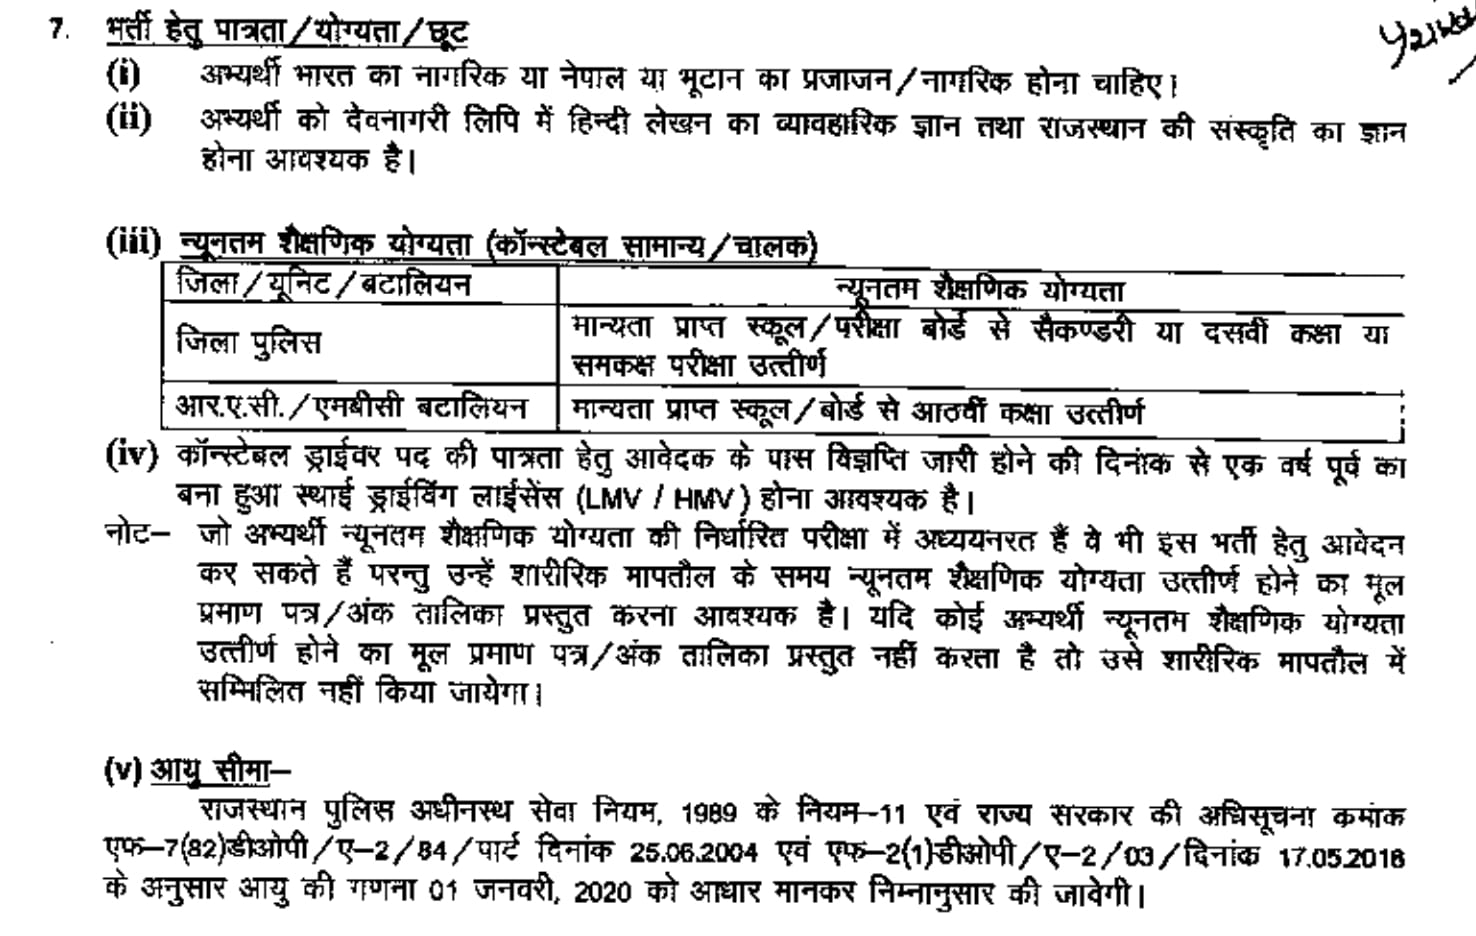 Eligibility of Rajasthan Police Constable post